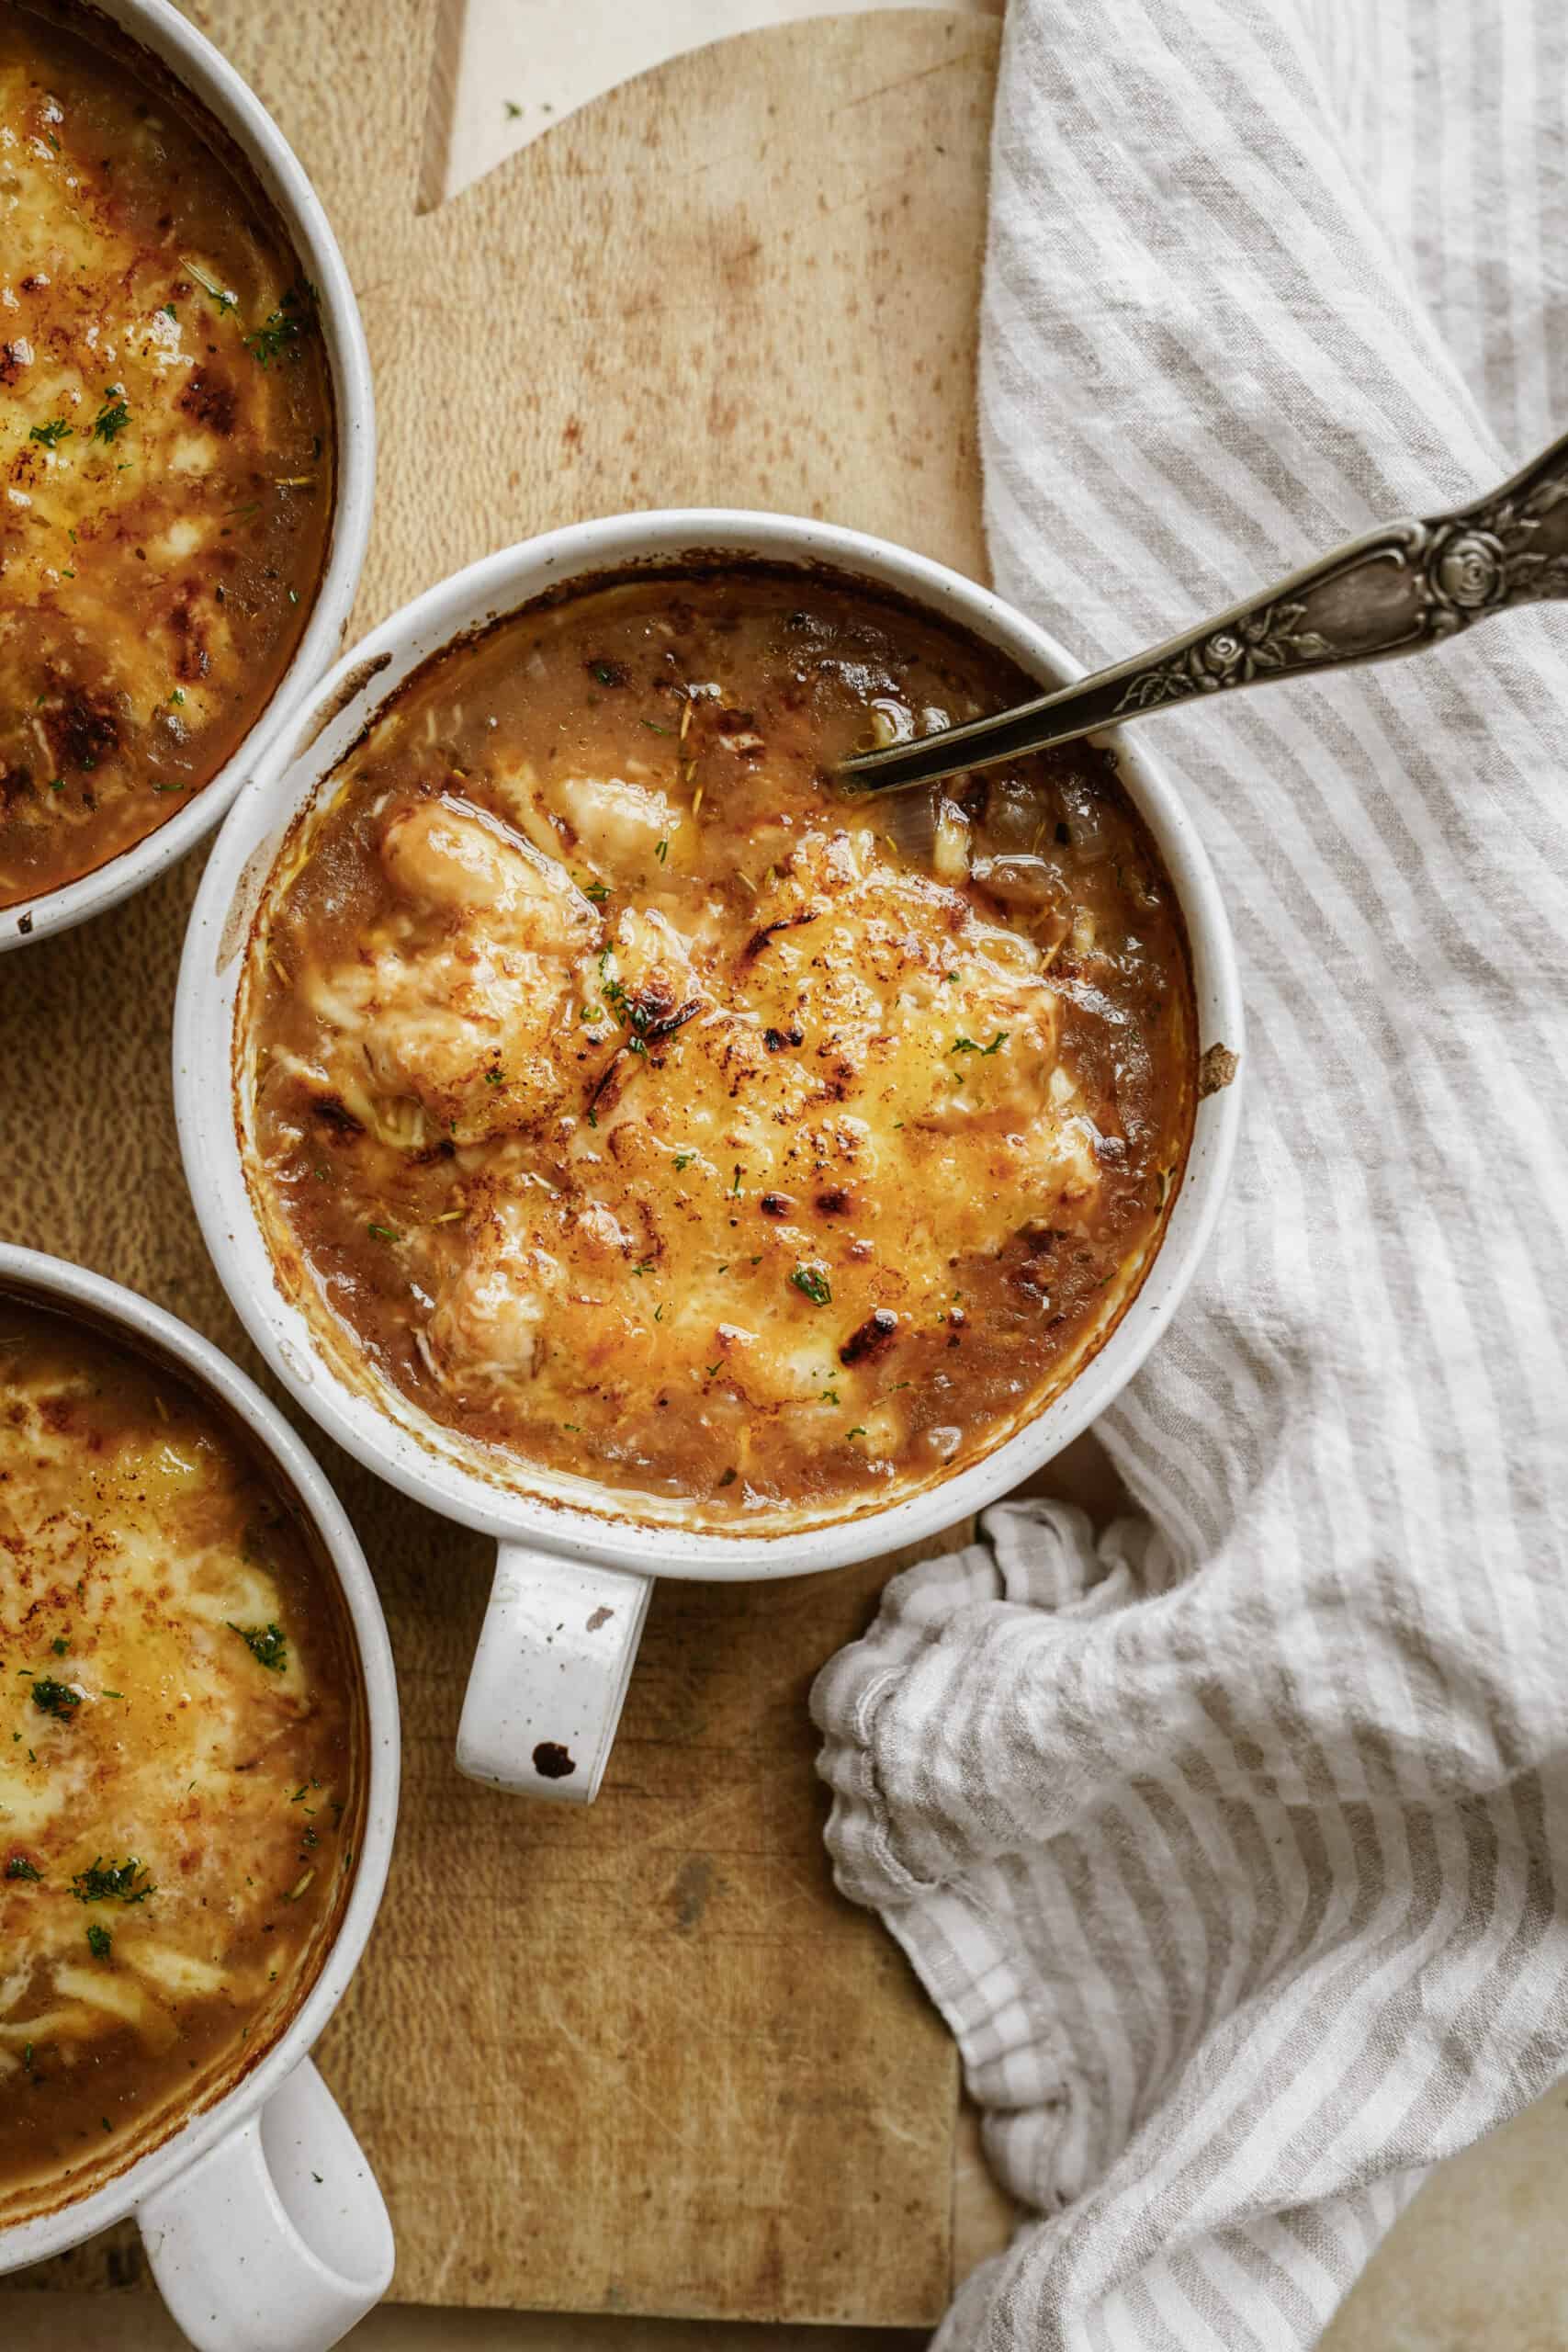 Baked gnocchi french onion soup with cheese